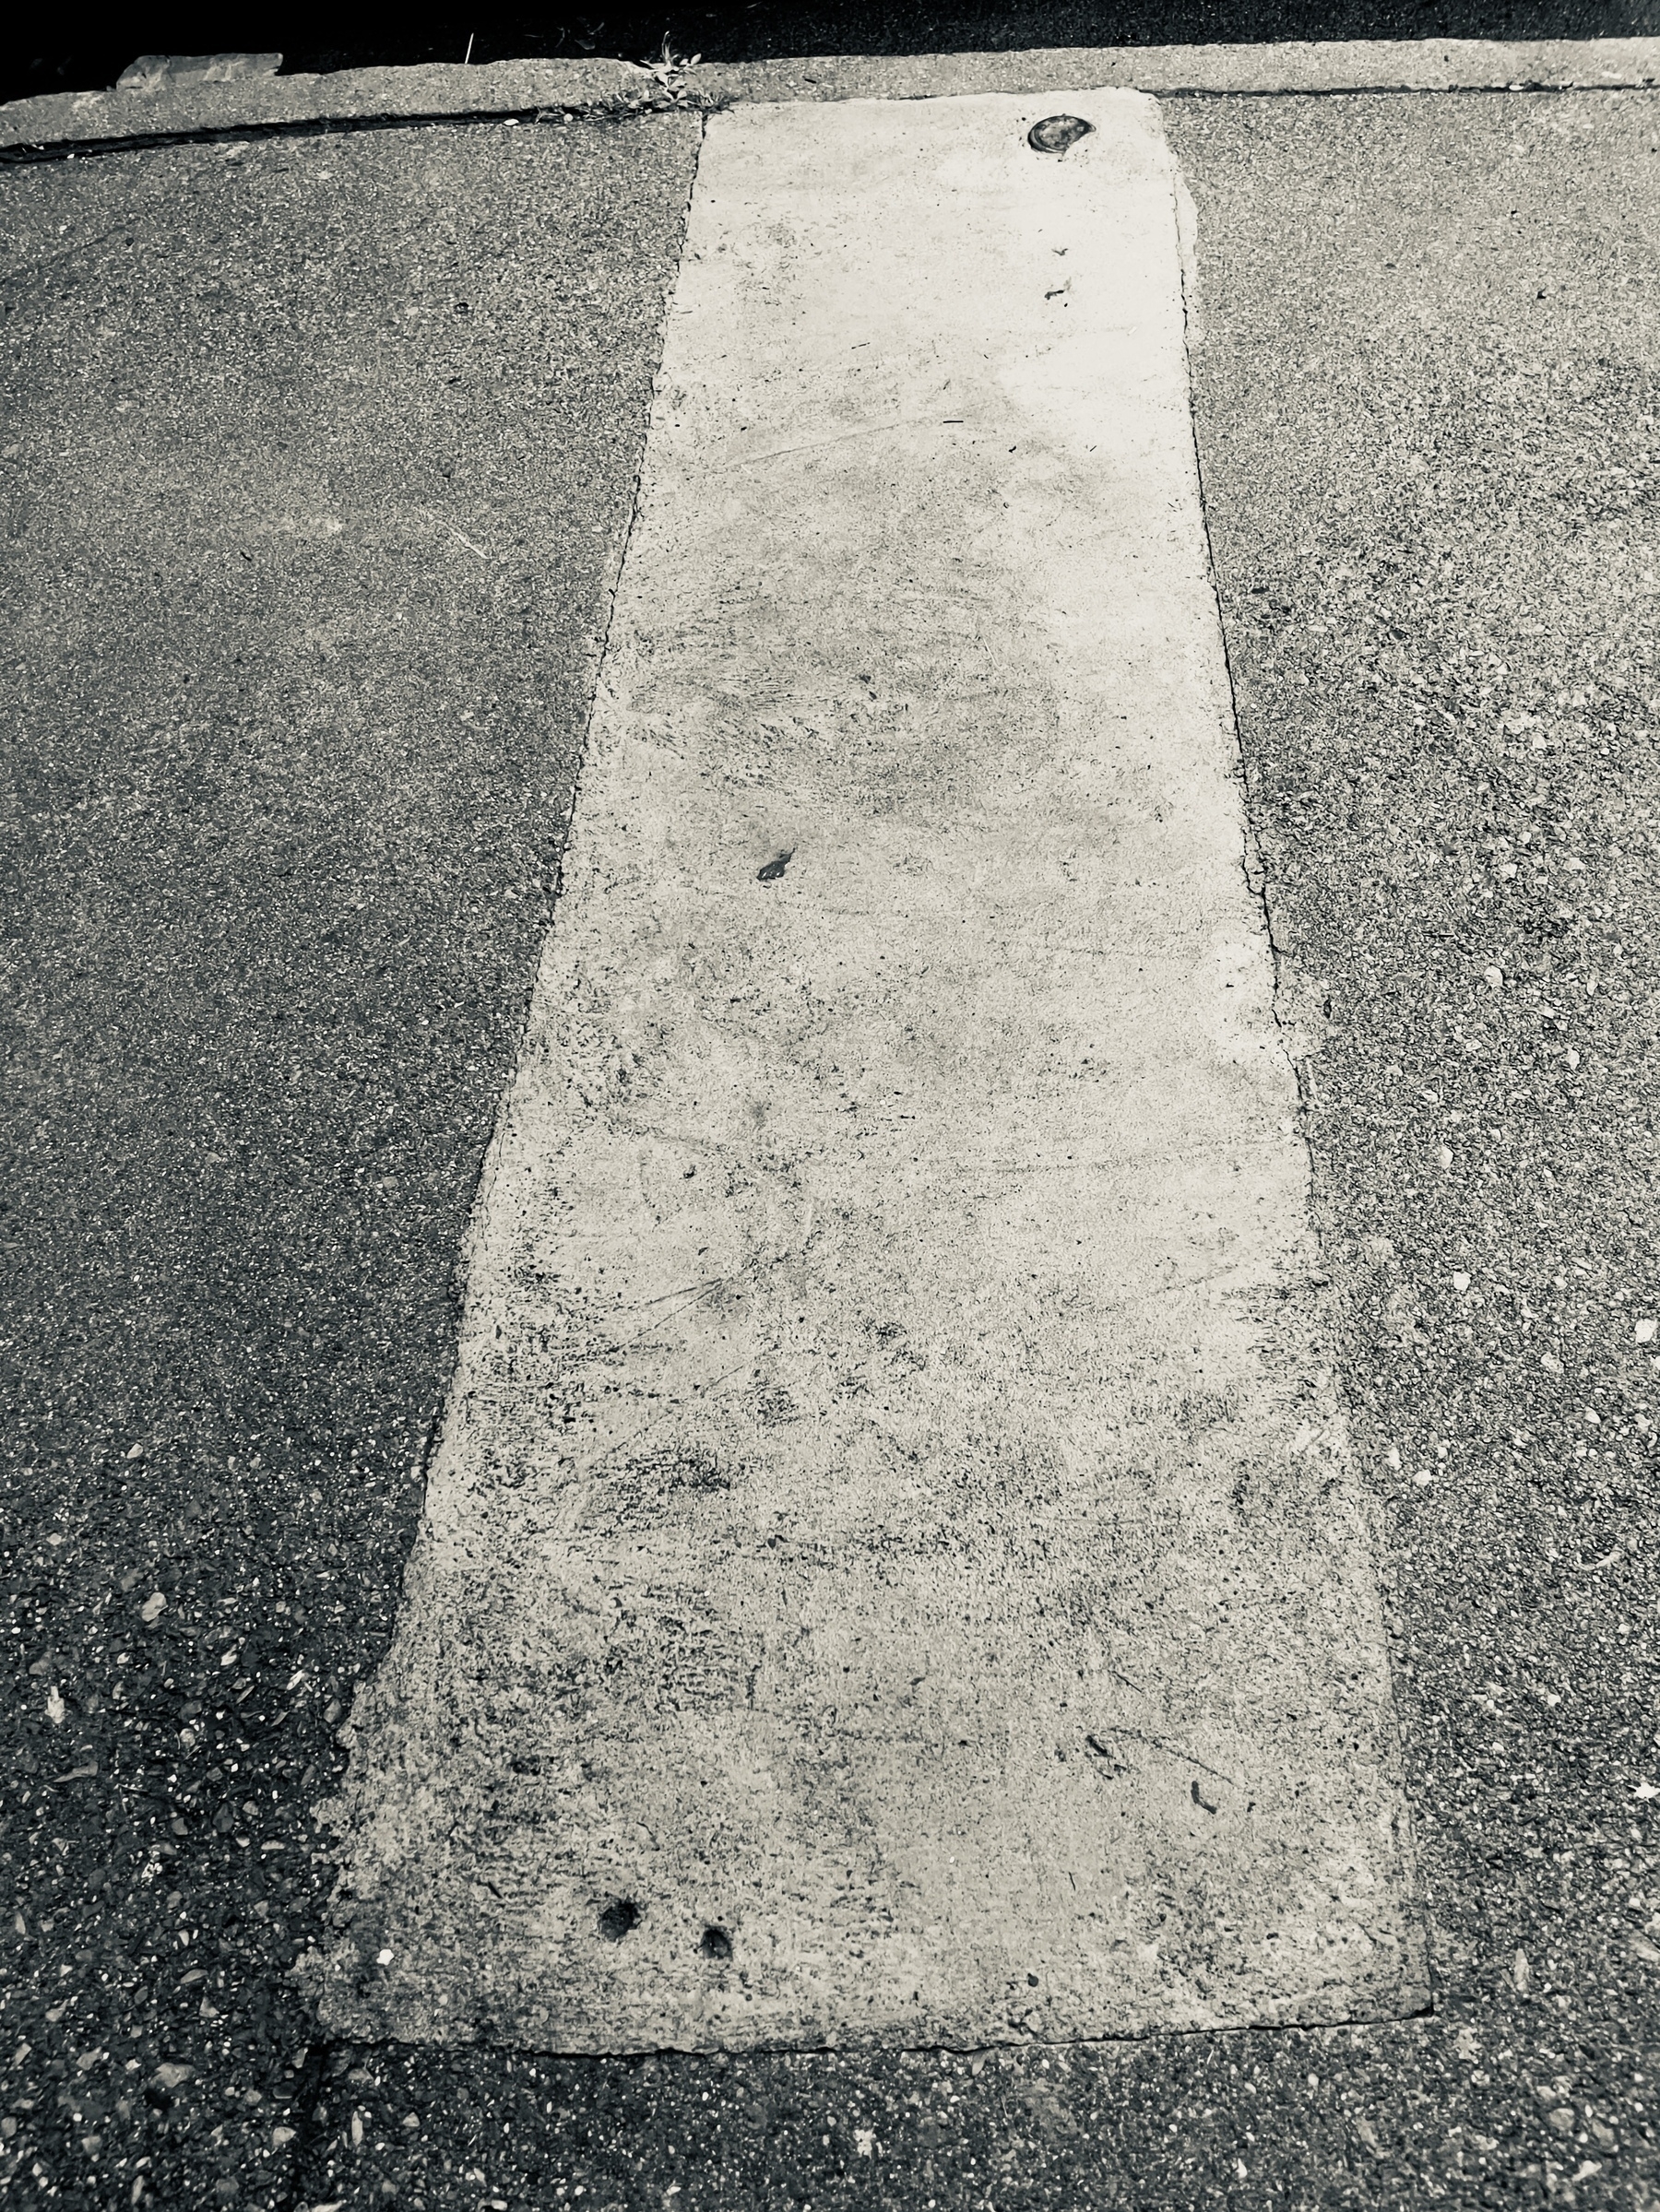 Elongated rectangular patch in concrete sidewalk running from top to bottom of frame. A primitive vibe to the shape and scene.